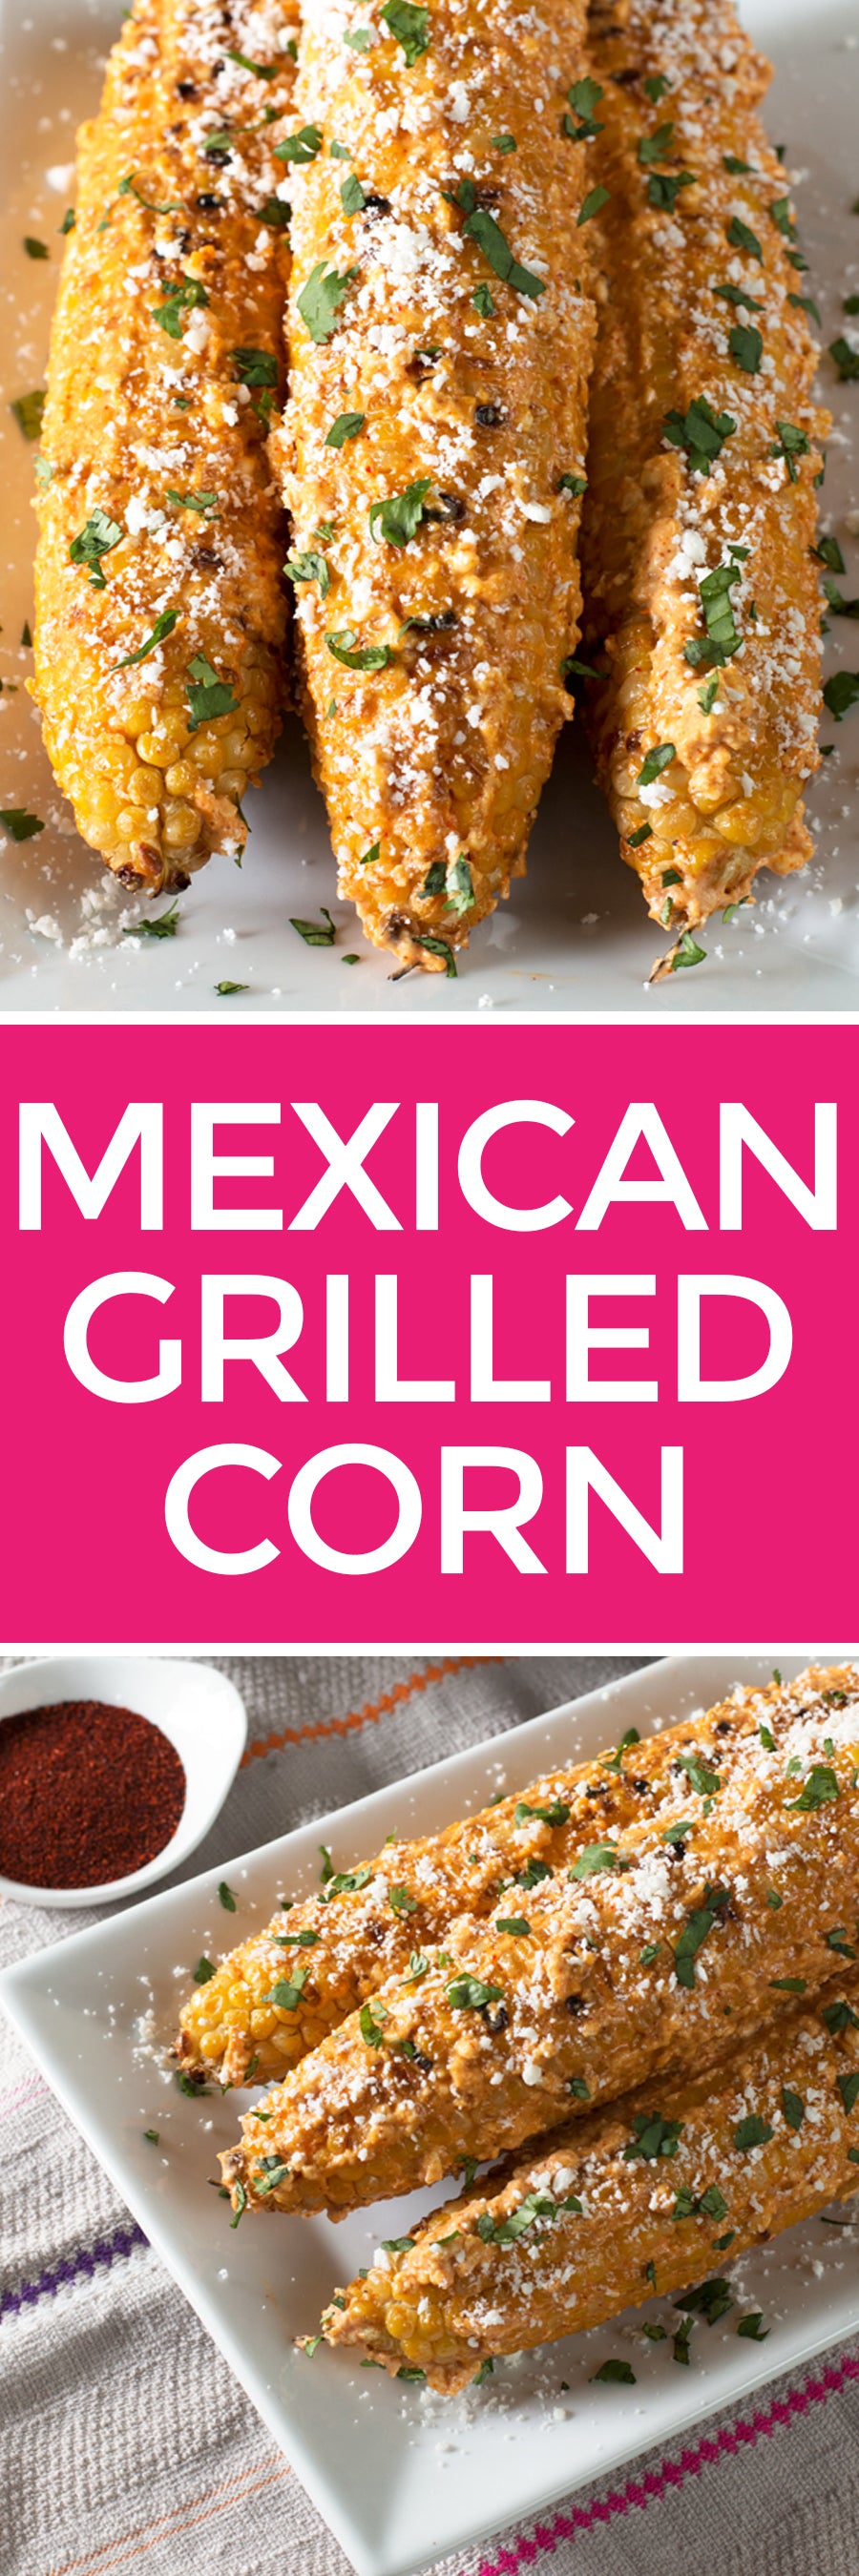 Mexican Grilled Corn | pigofthemonth.com #grilling #tailgating #vegetarian